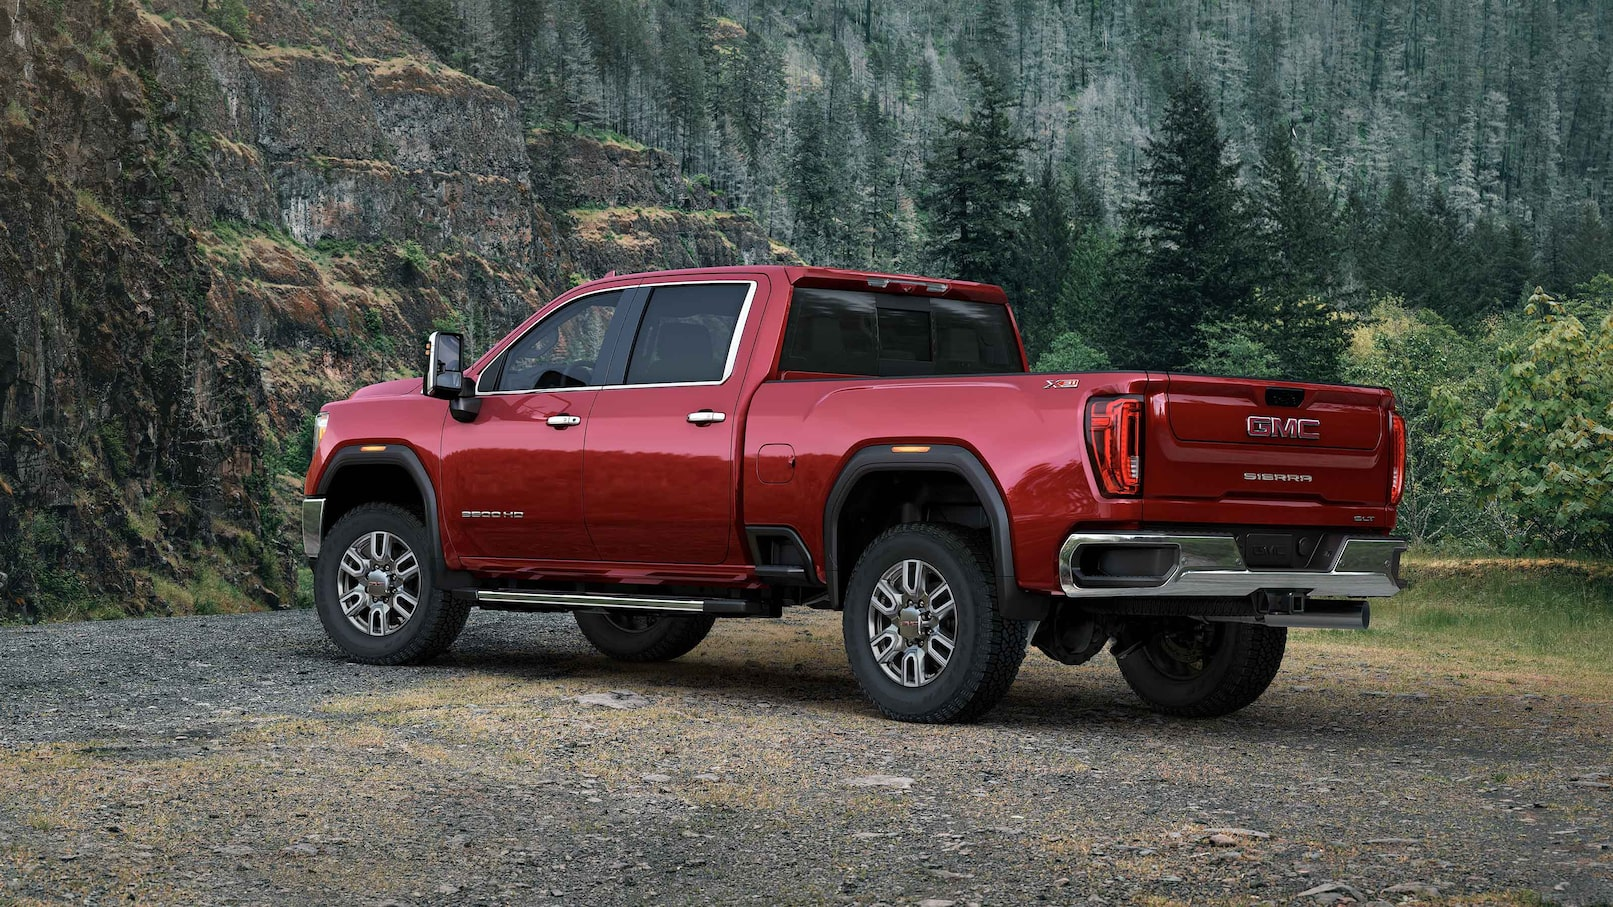 2021 GMC Sierra 1500 Towing Features | Starling Buick GMC Venice